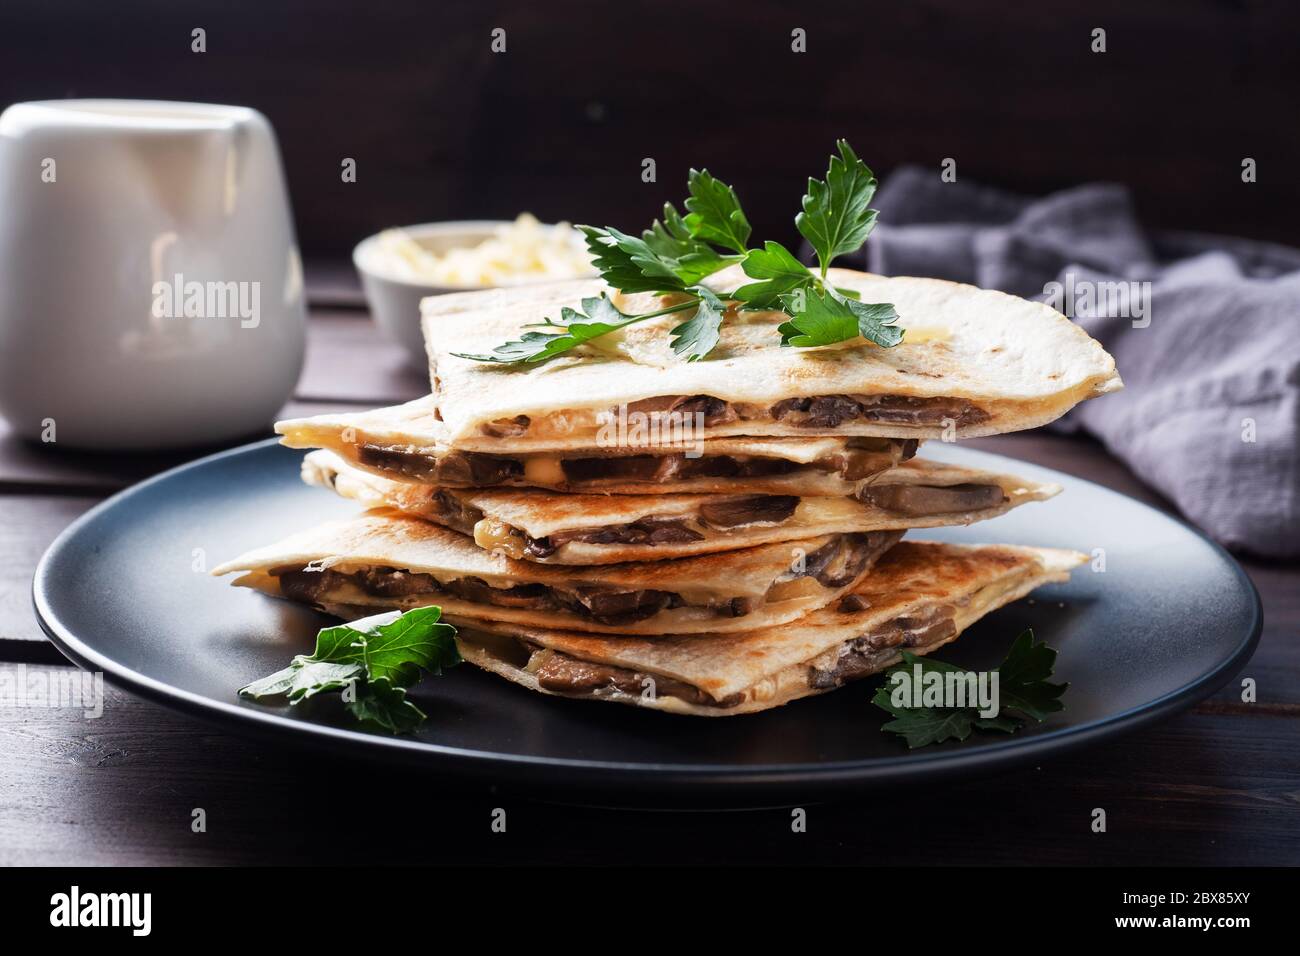 Pieces of quesadilla with mushrooms sour cream and cheese on a plate with parsley leaves. Wooden background close up Stock Photo